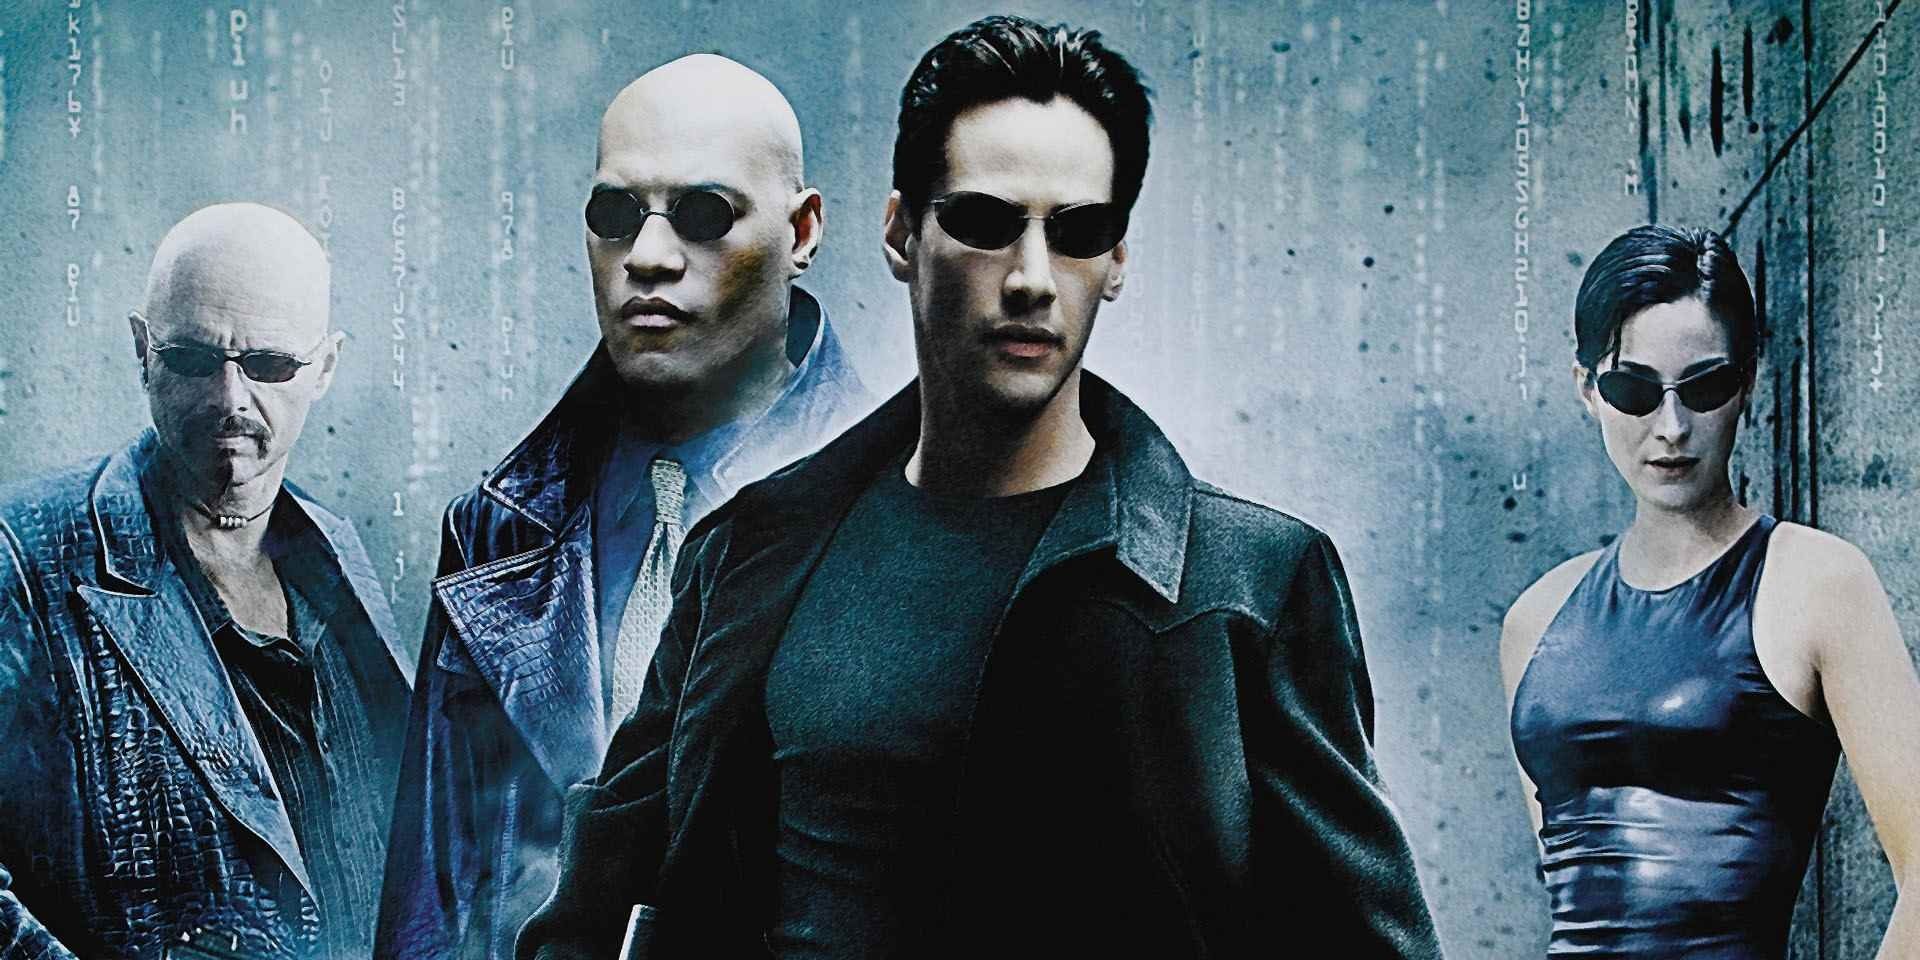 Keanu Reeves, Laurence Fishburne, and Carrie-Anne Moss on The Matrix poster